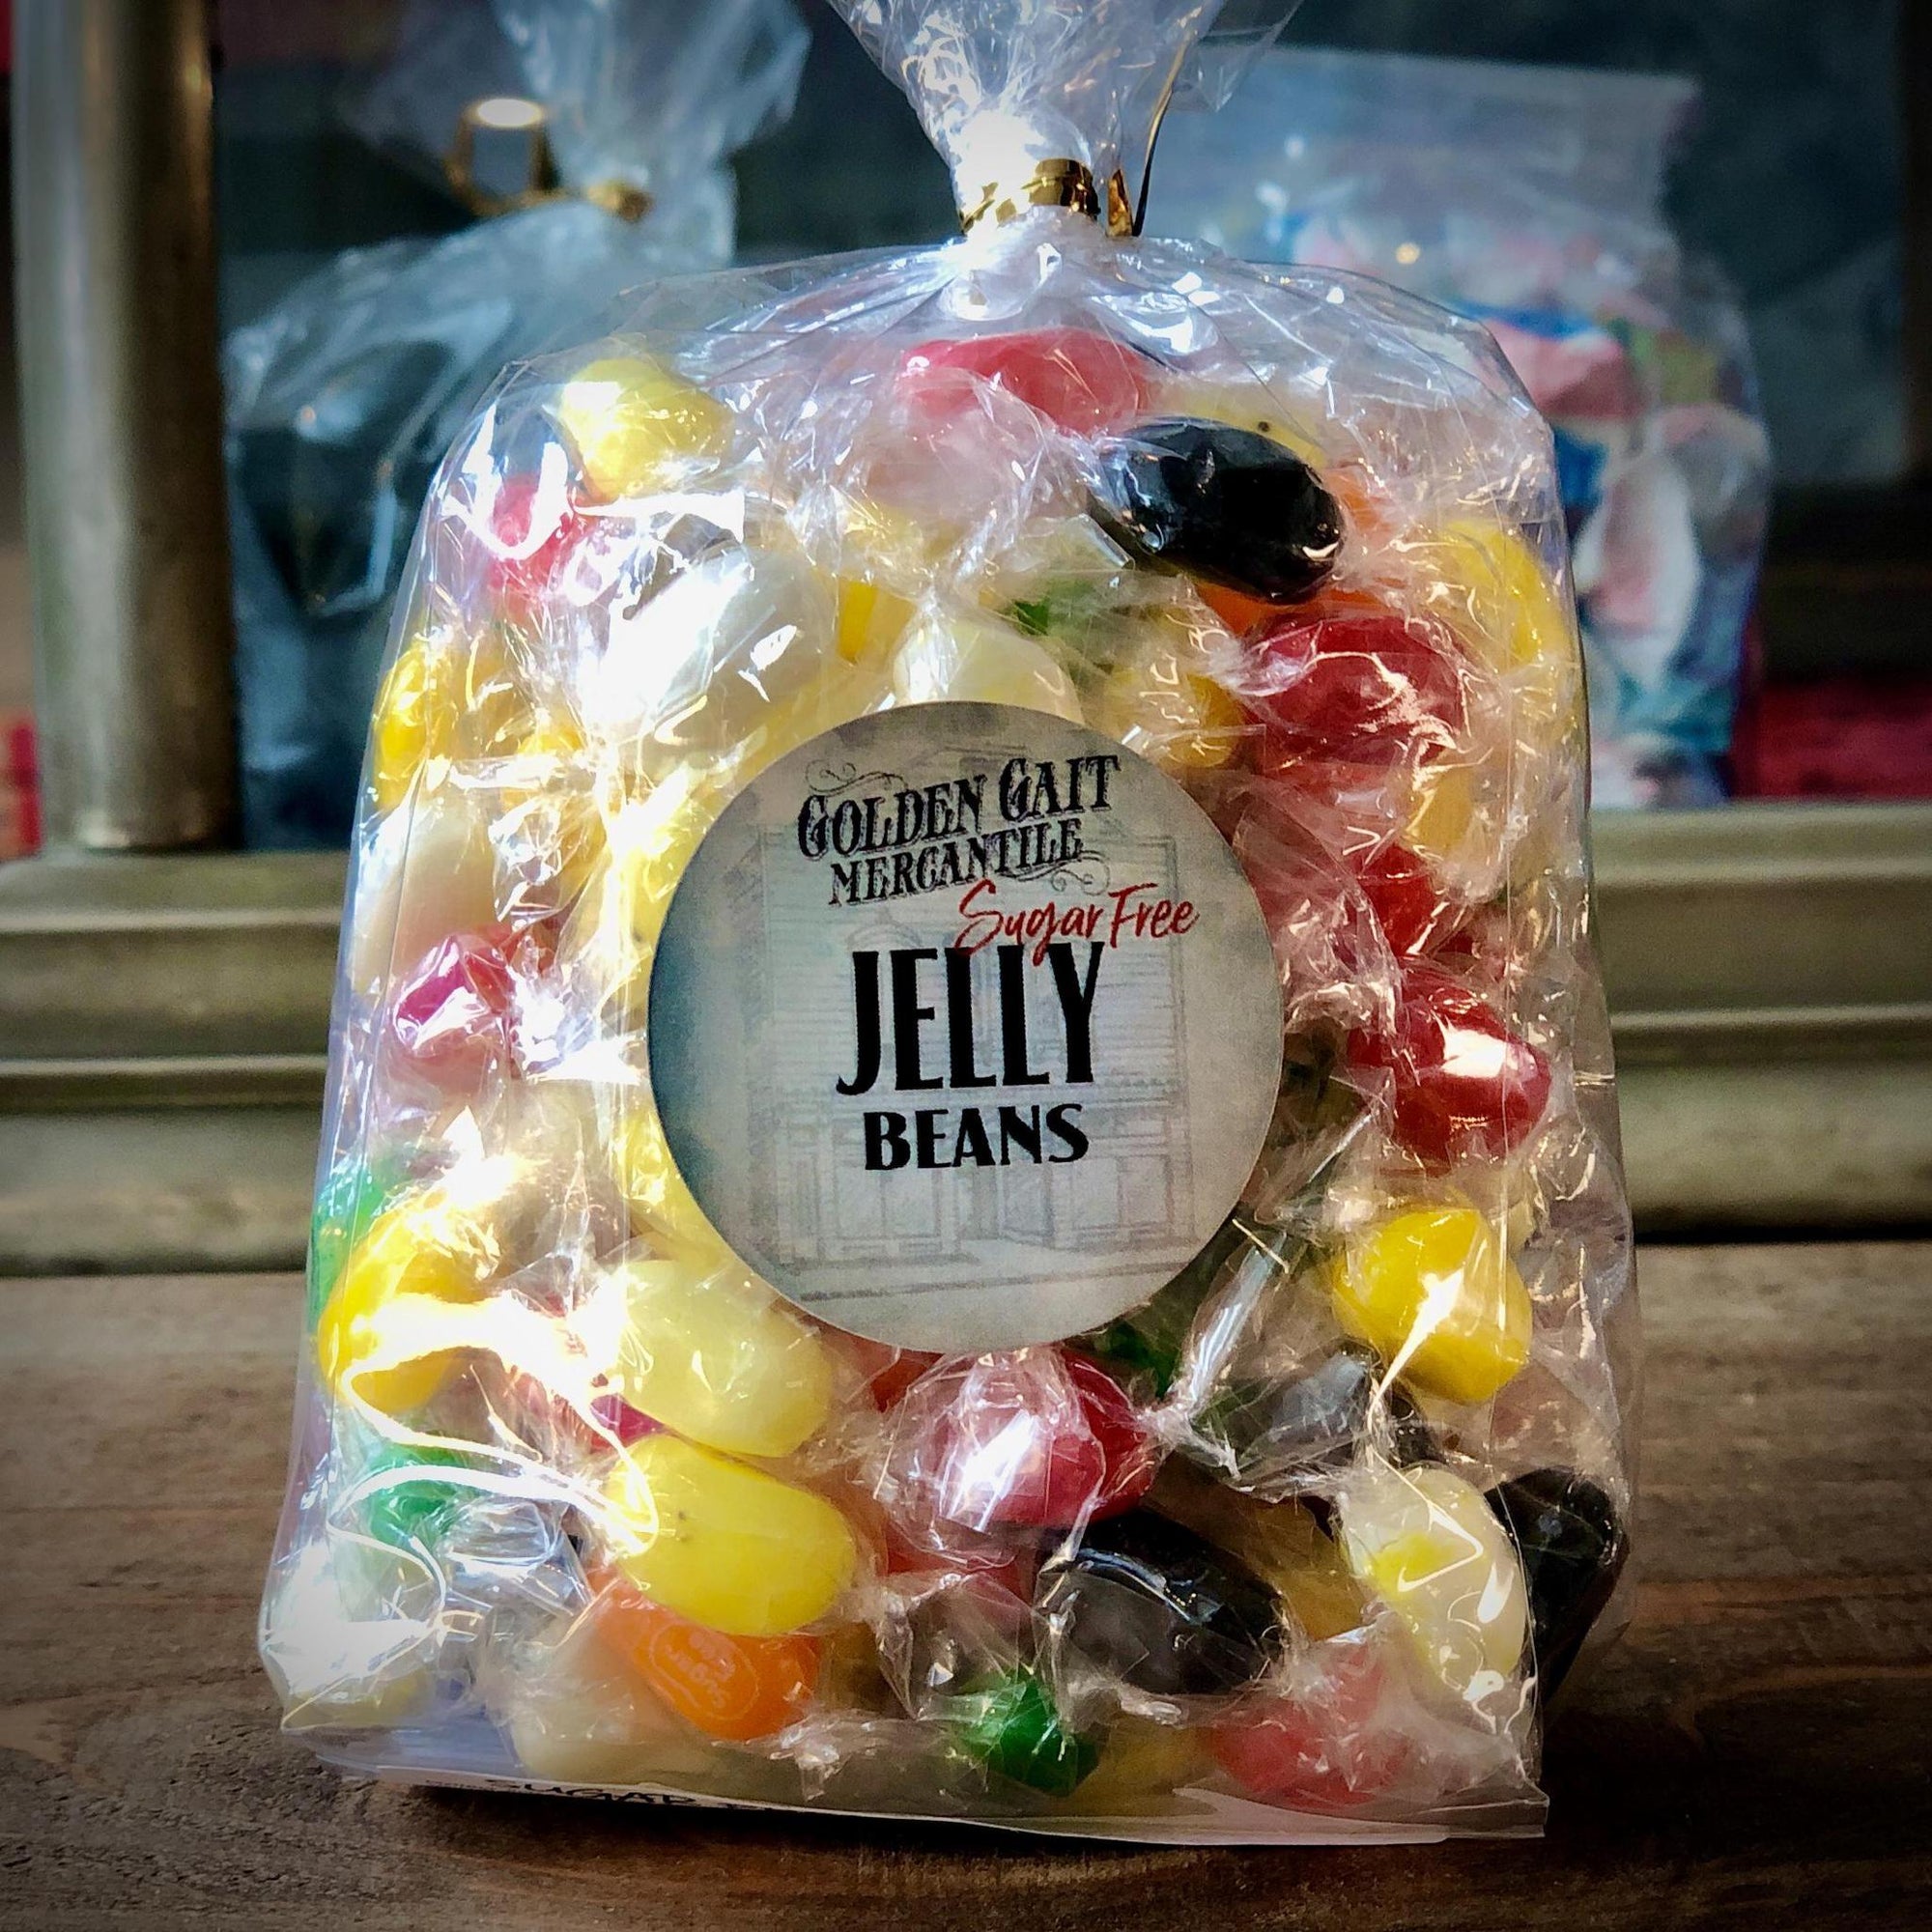 SUGAR FREE Jelly Belly Beans By The Golden Gait Mercantile